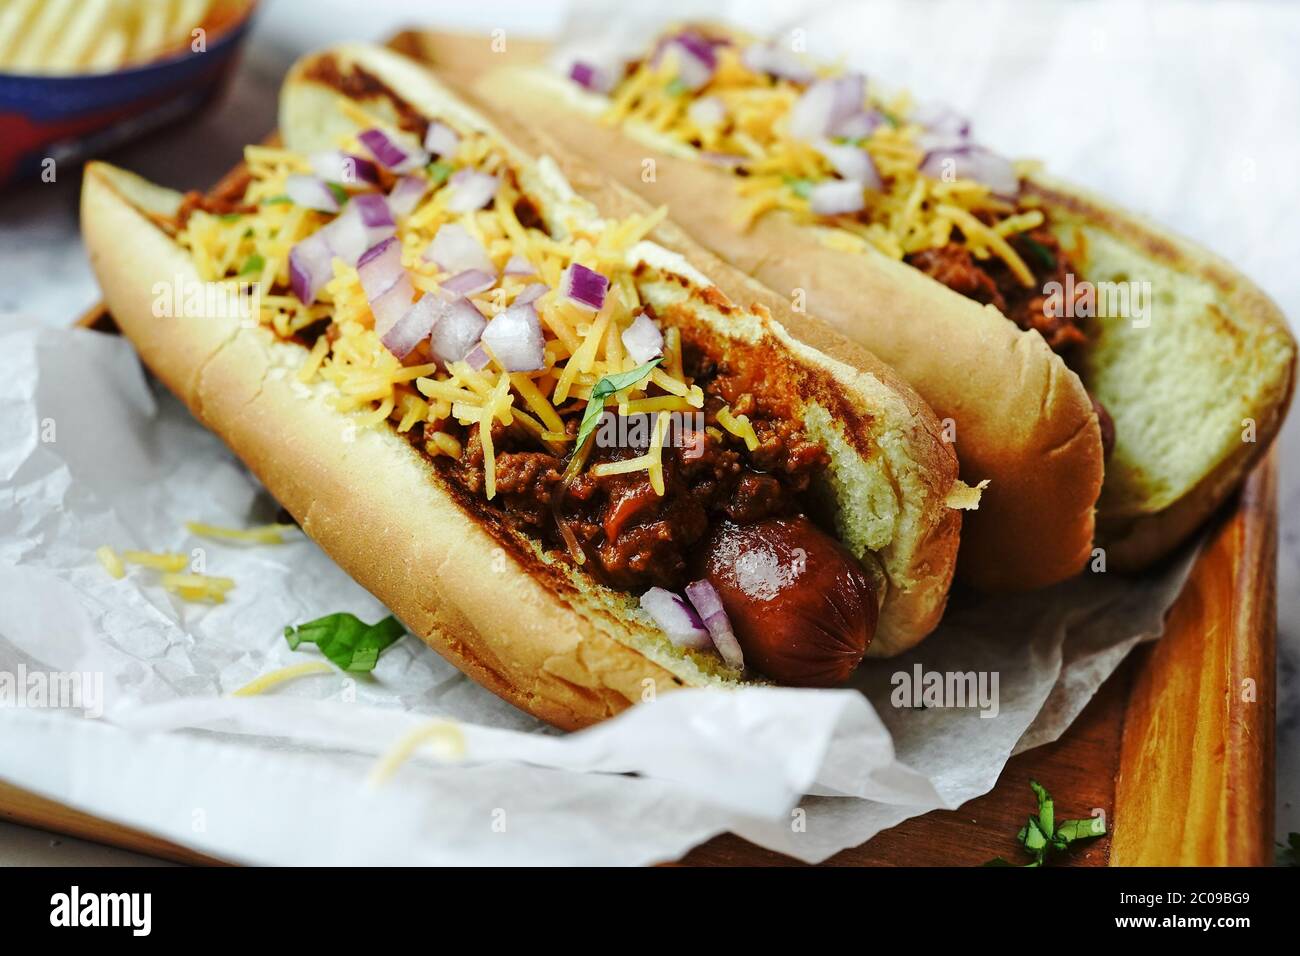 Homemade Chili dogs topped with cheddar cheese, selective focus Stock Photo